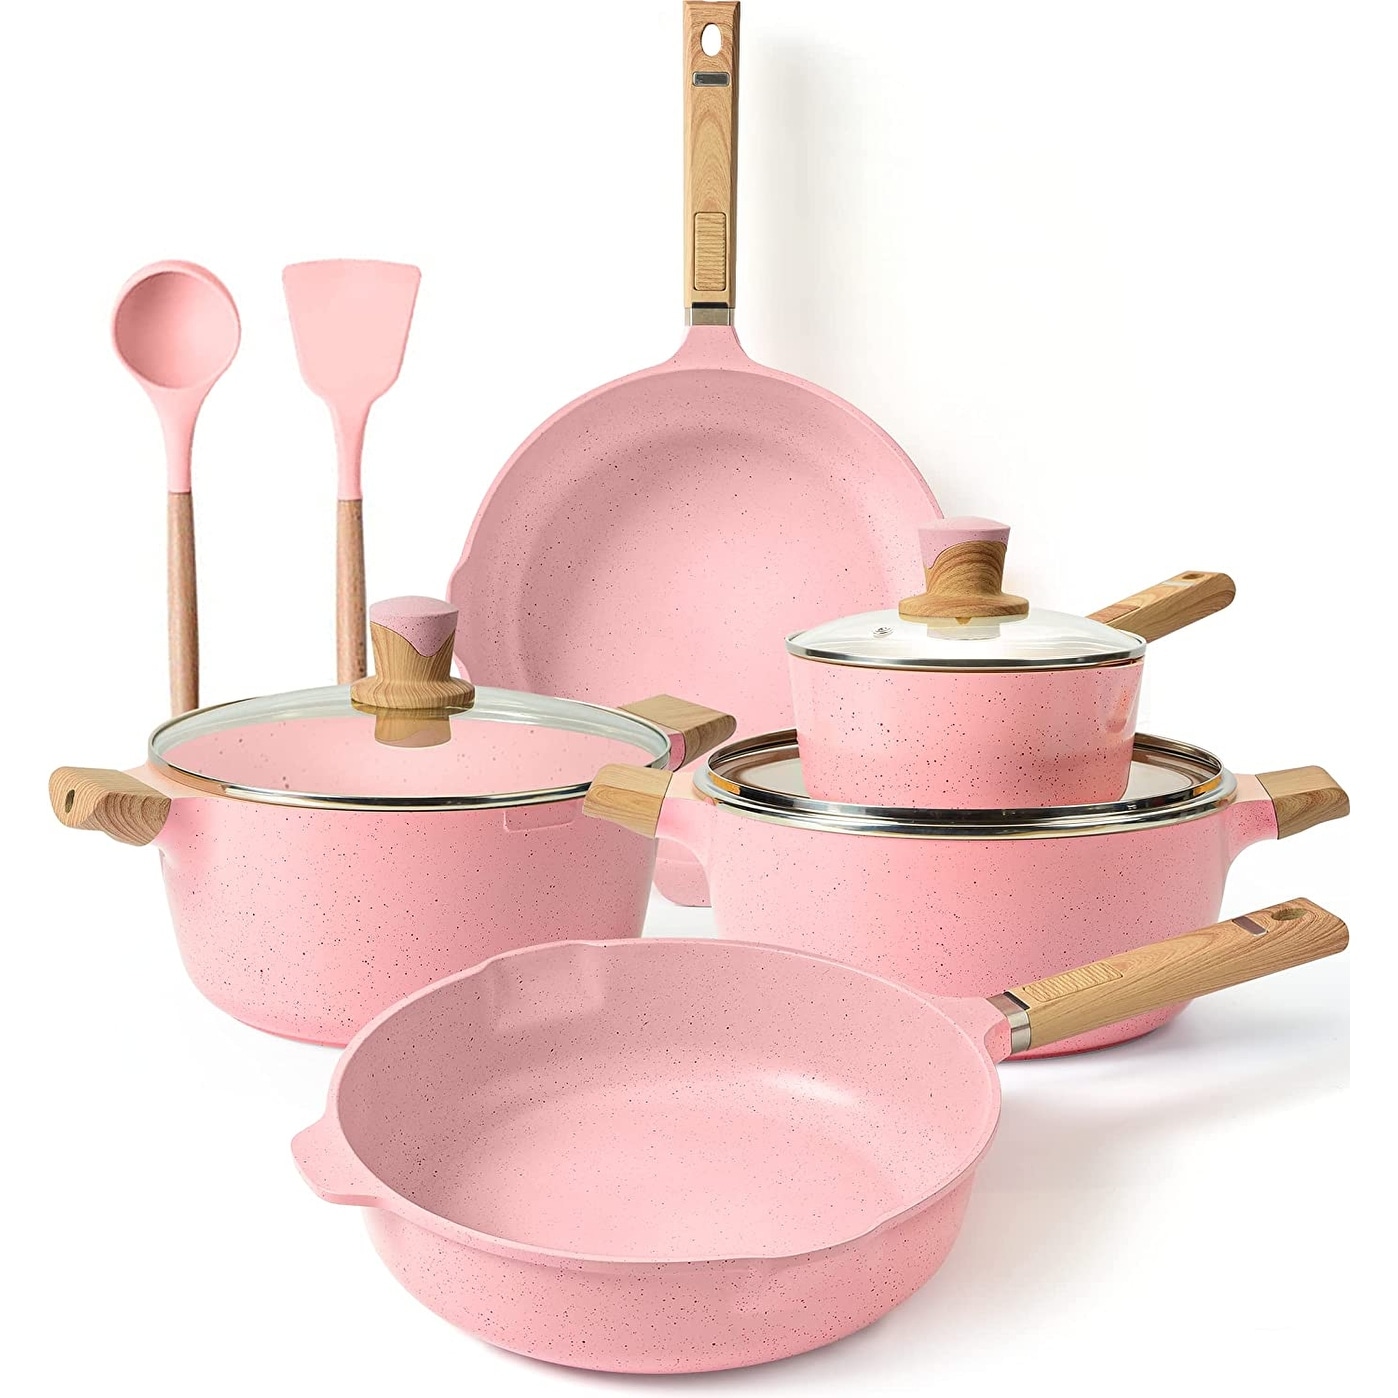 https://ak1.ostkcdn.com/images/products/is/images/direct/fa57c2635d3f2d4b0f512577ba3149771a29f23c/Pans-and-Pots-Set-Nonstick---16-PCS-Granite-Cookware-Set-Non-Stick-Induction-Cookware-sets.jpg